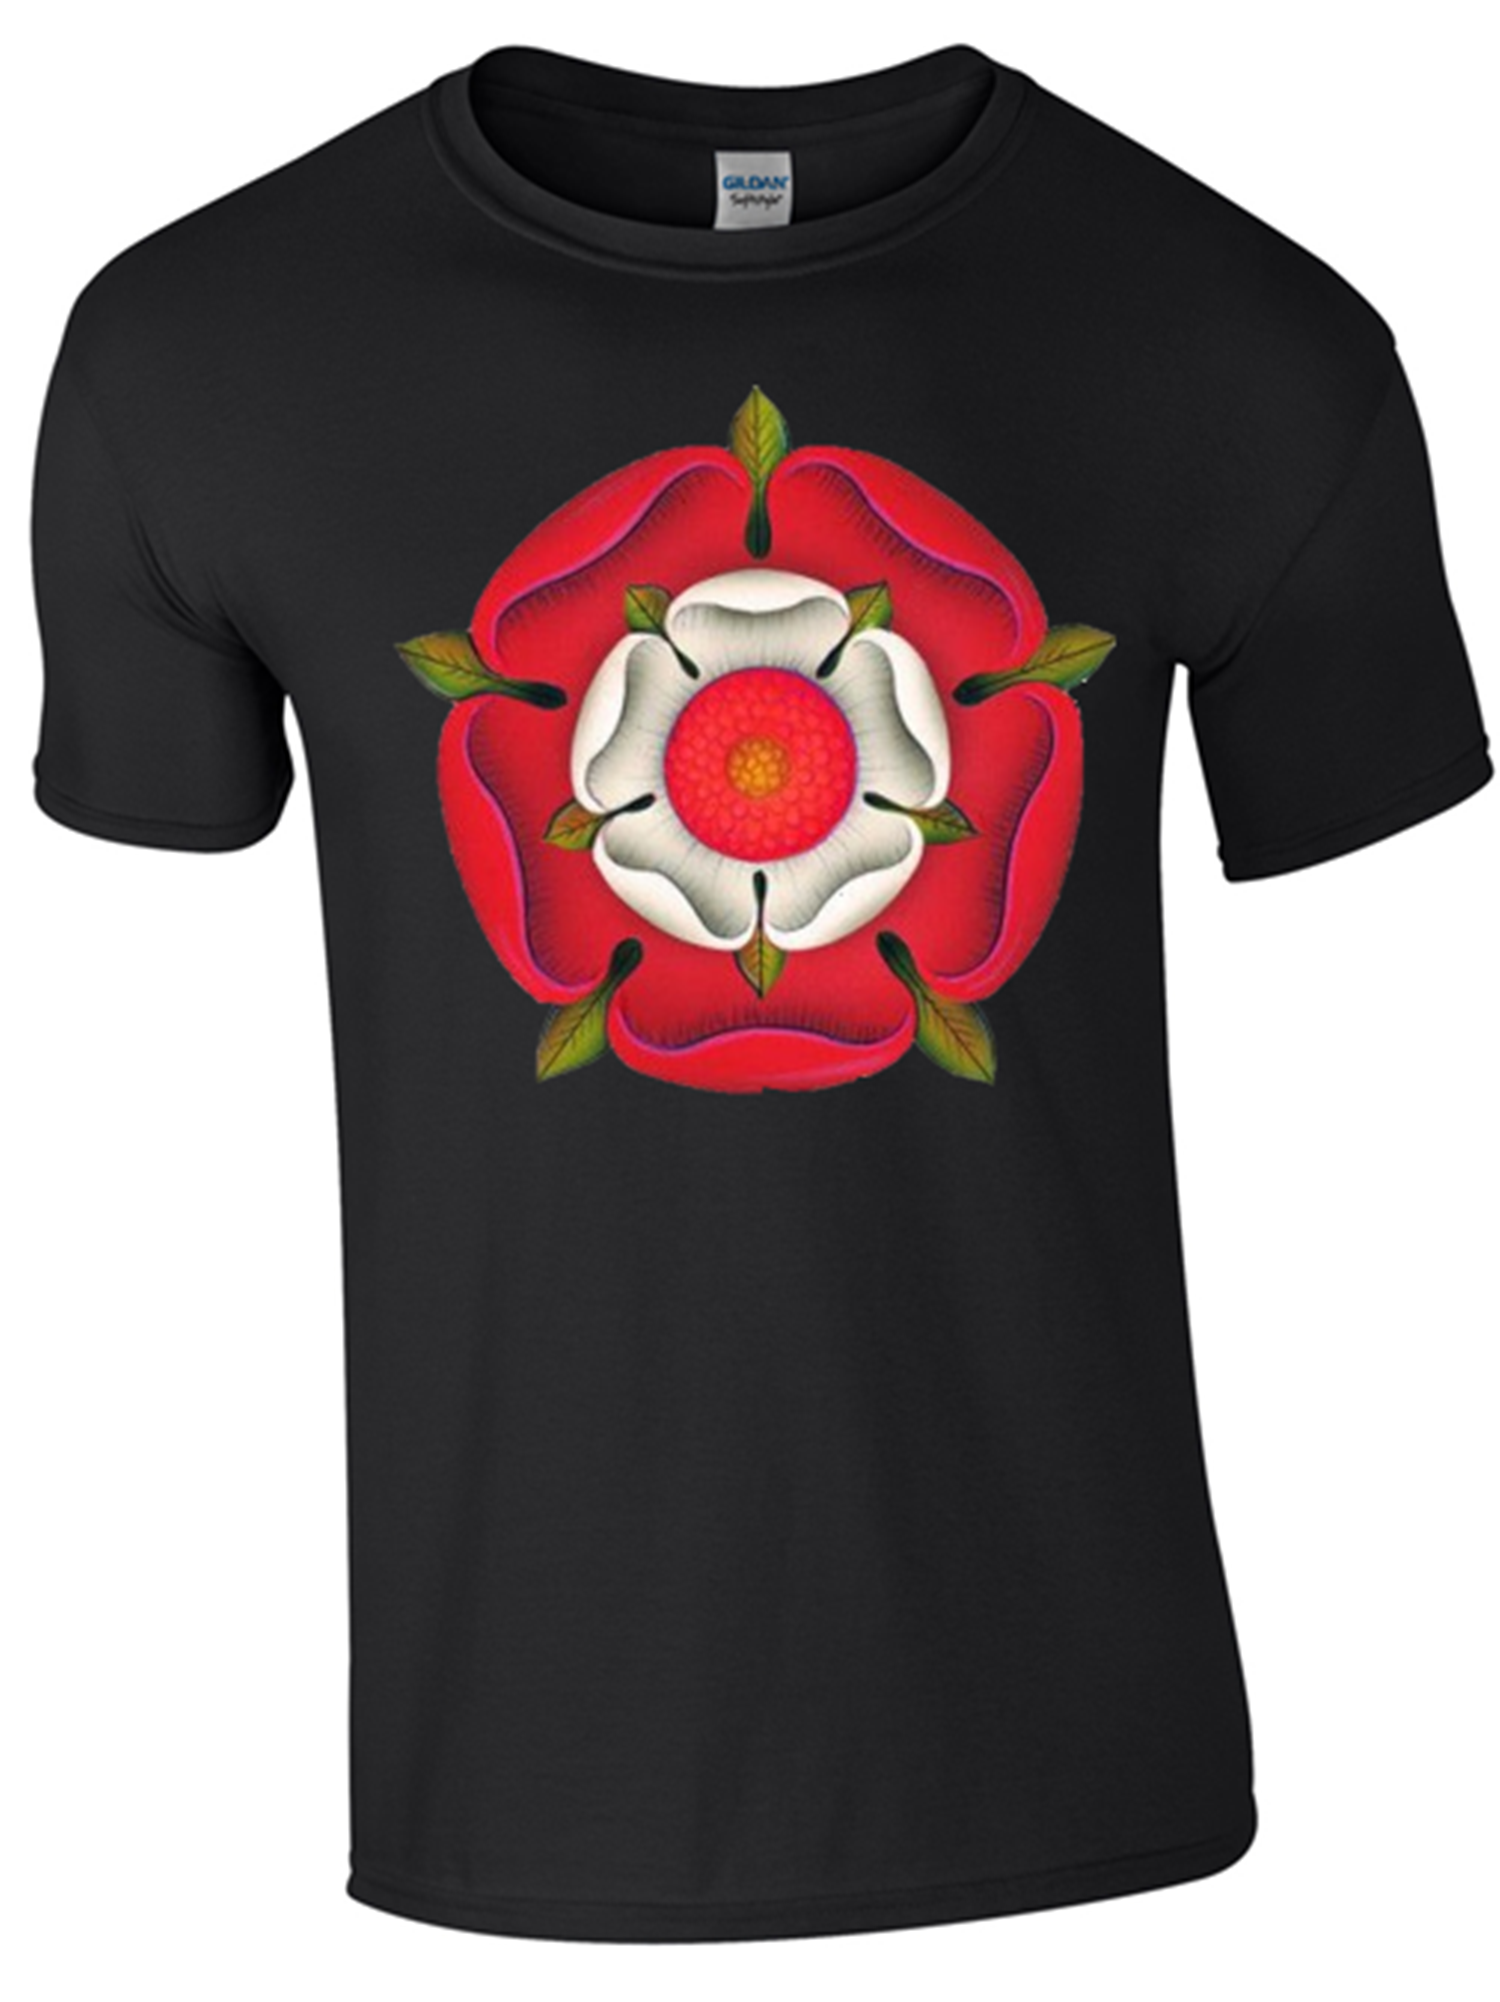 St George's Day English Rose T-Shirt Printed DTG (Direct to Garment) for a Permanent Finish. - Army 1157 kit S / Black Army 1157 Kit Veterans Owned Business